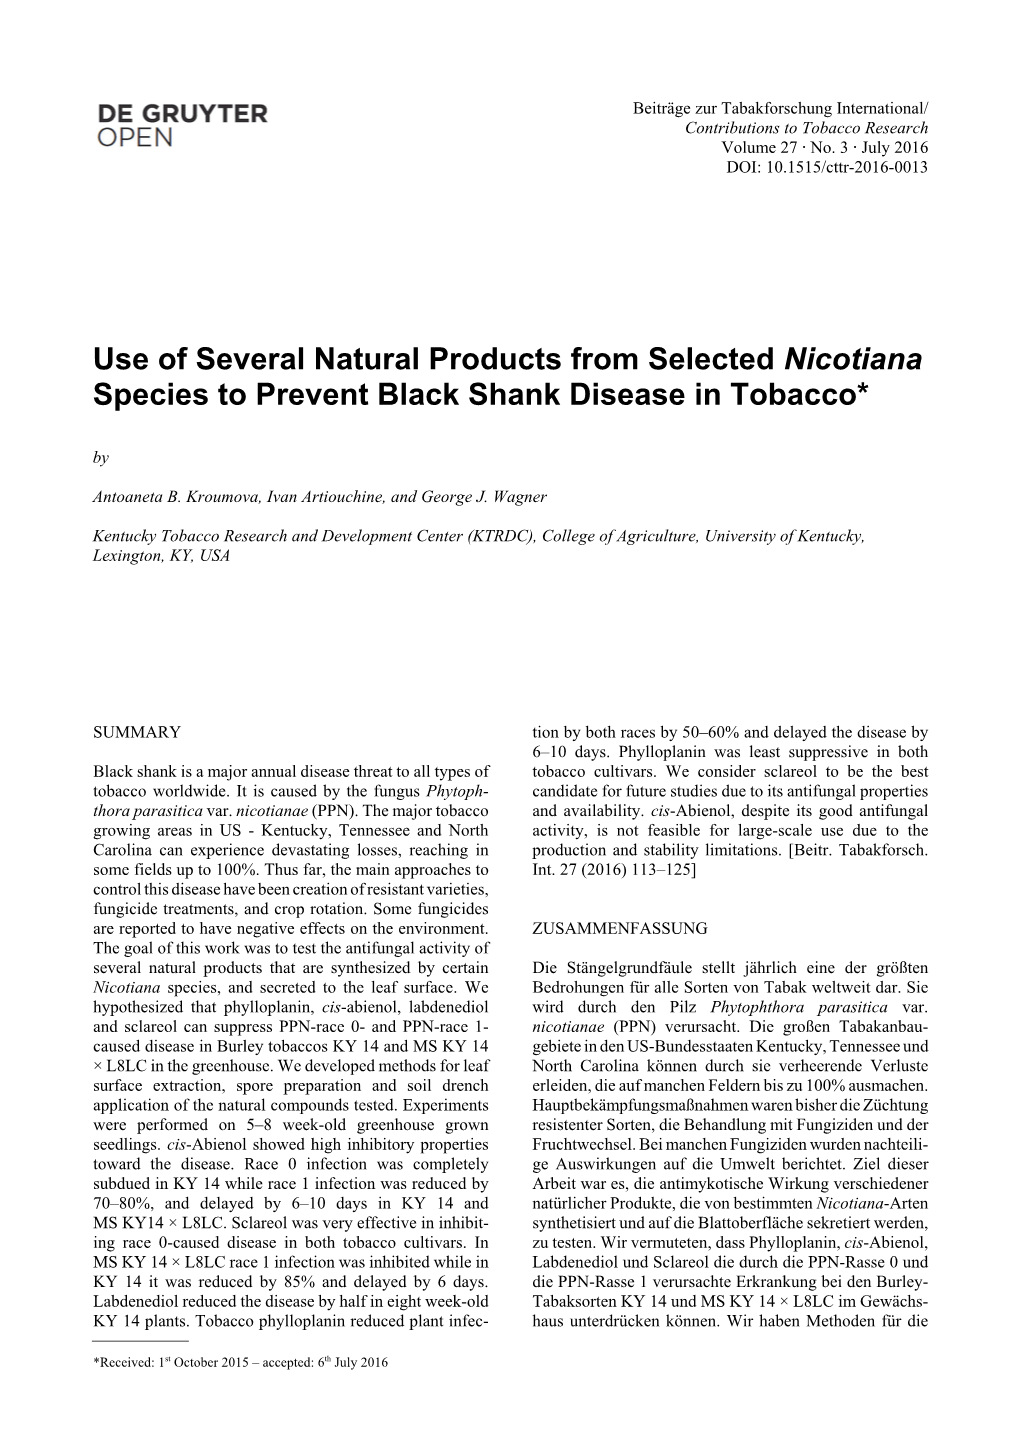 Use of Several Natural Products from Selected Nicotiana Species to Prevent Black Shank Disease in Tobacco* By